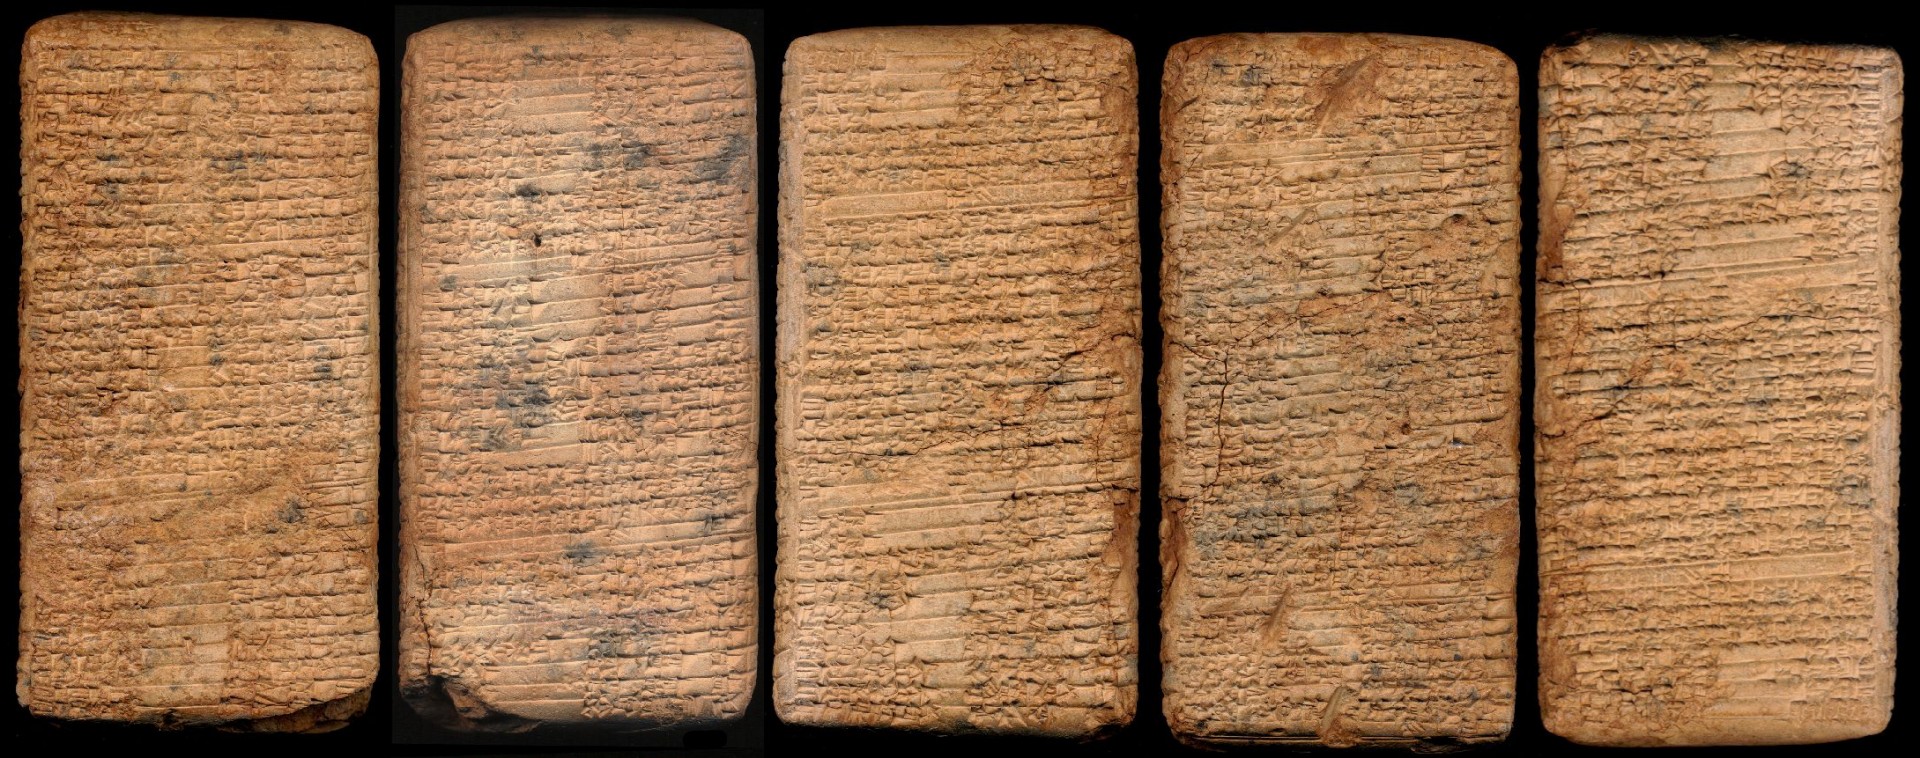 Babylonian clay tablets